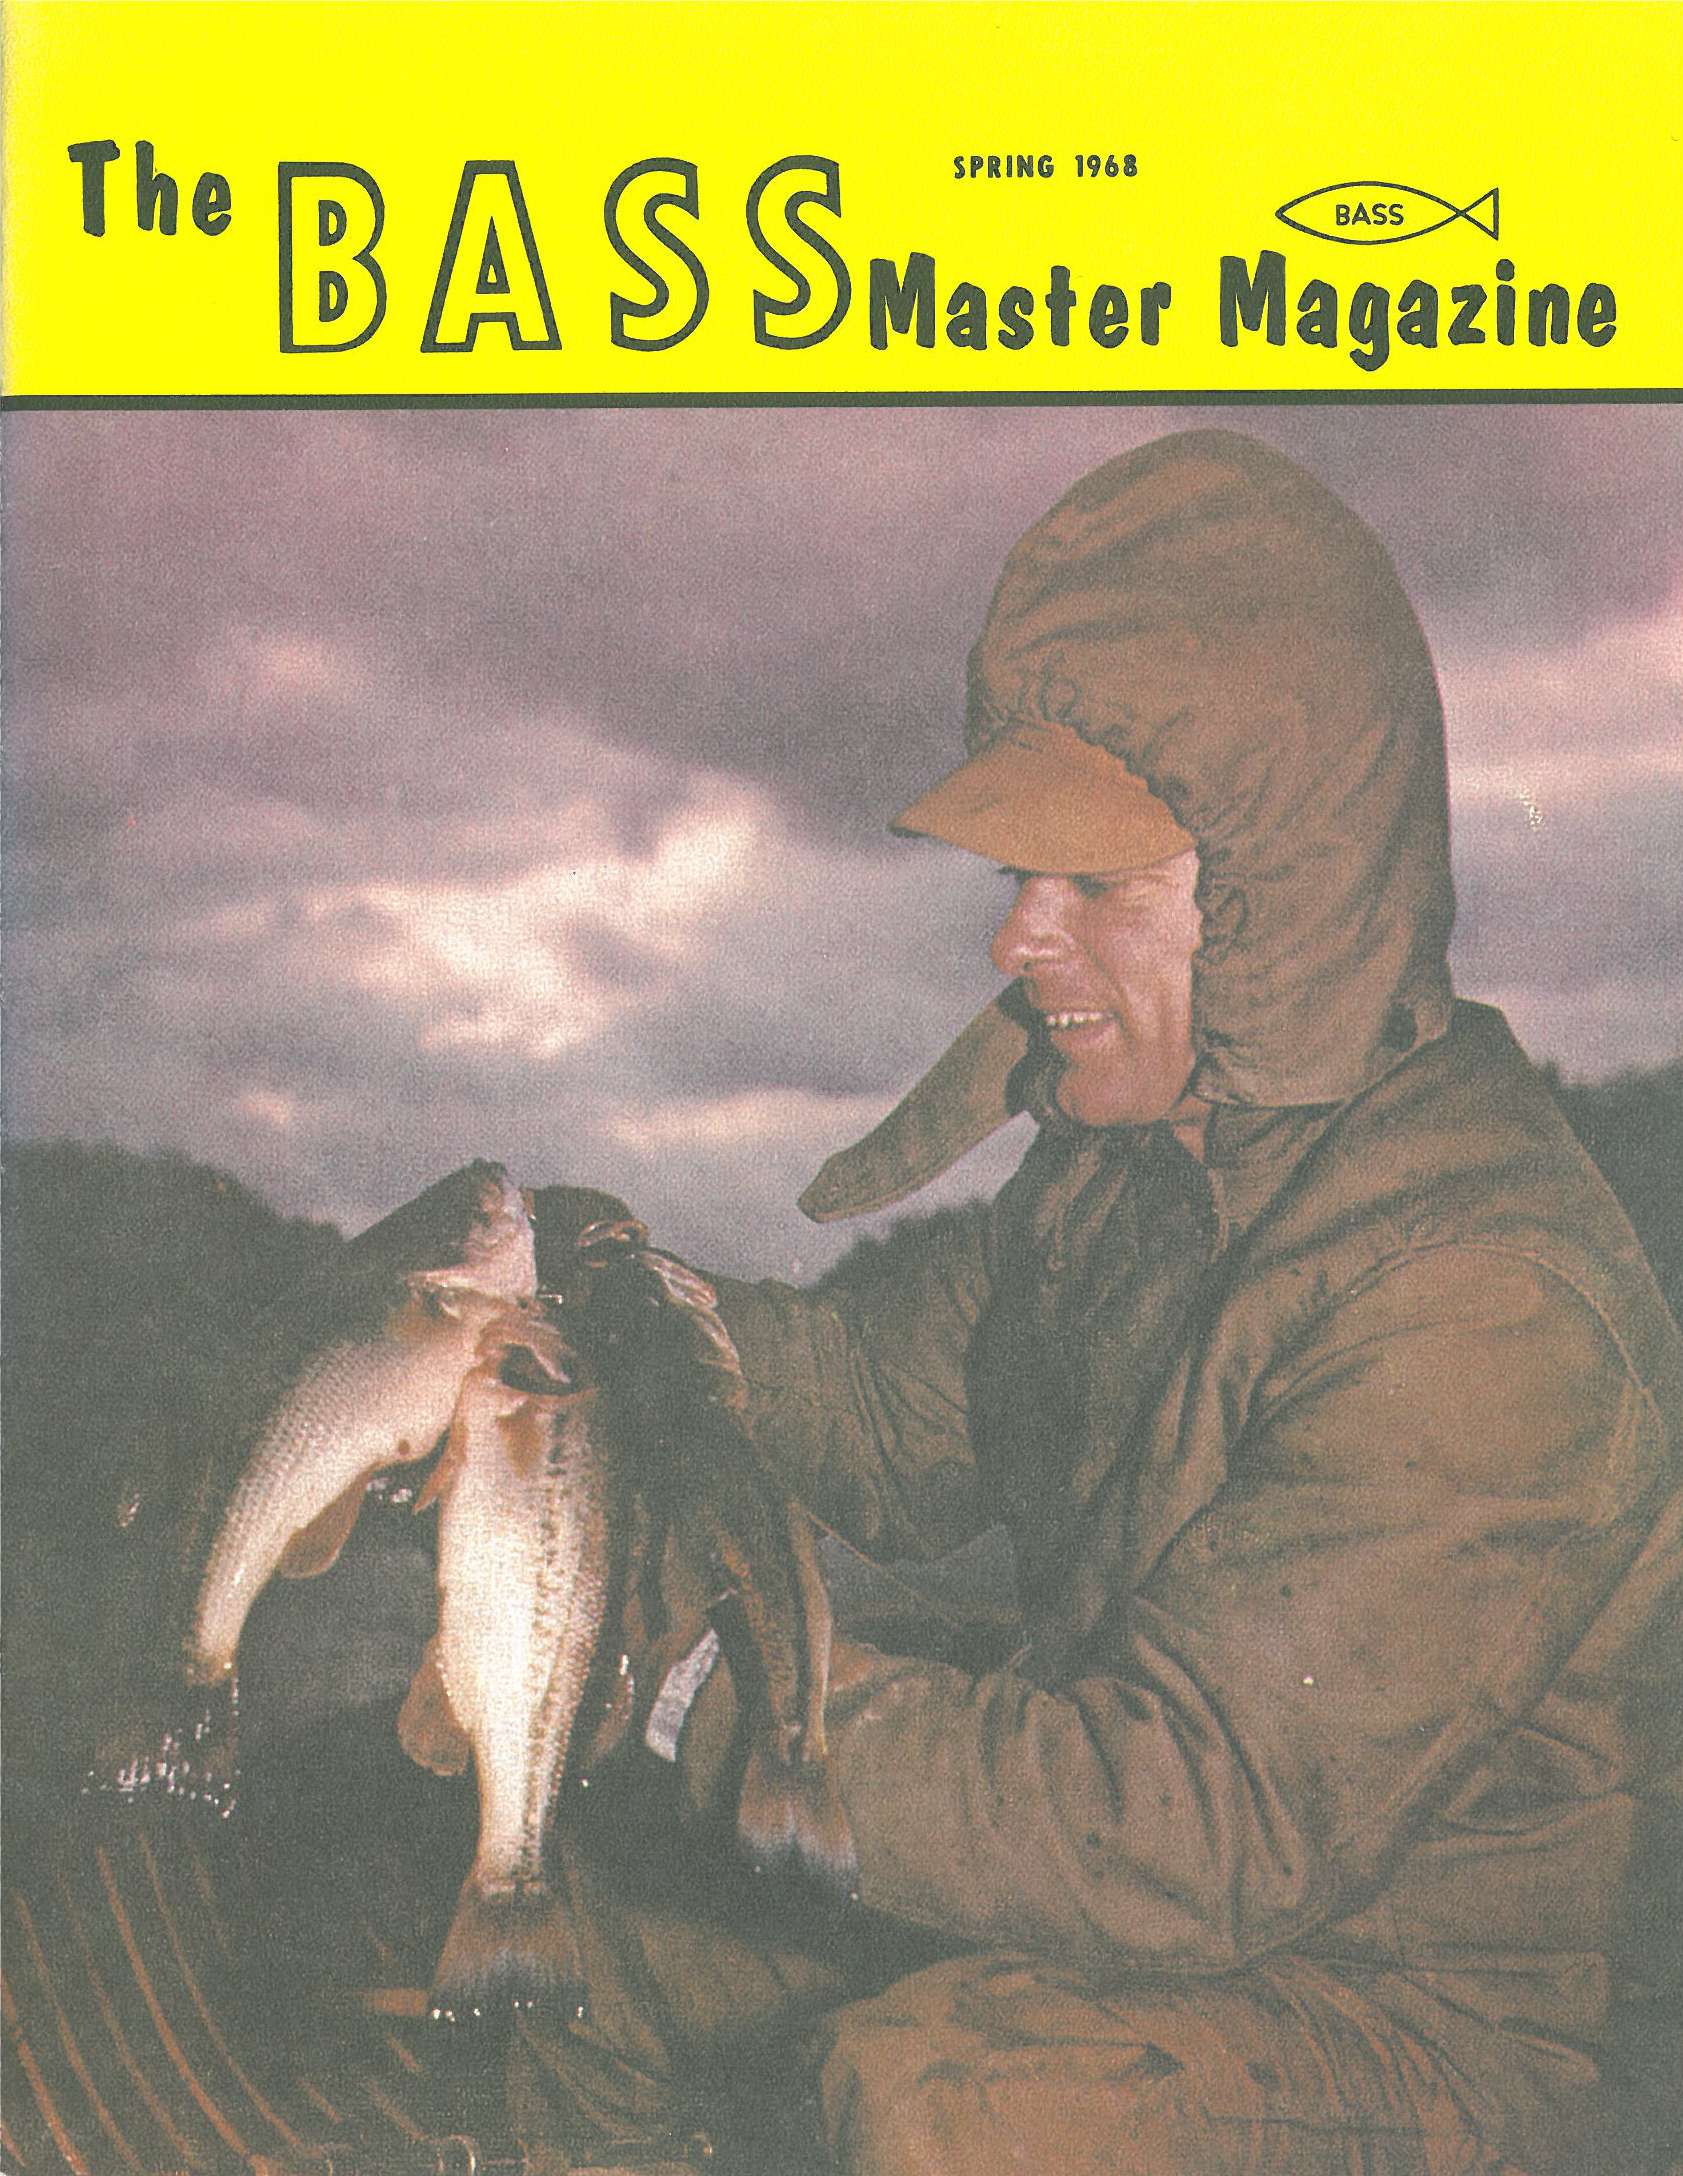 The Bassmaster Magazine debuted with the Spring 1968 issue. In this photo gallery, we'll take a look back at the ads that appeared in the first three issues of the magazine. My, how times have changed!